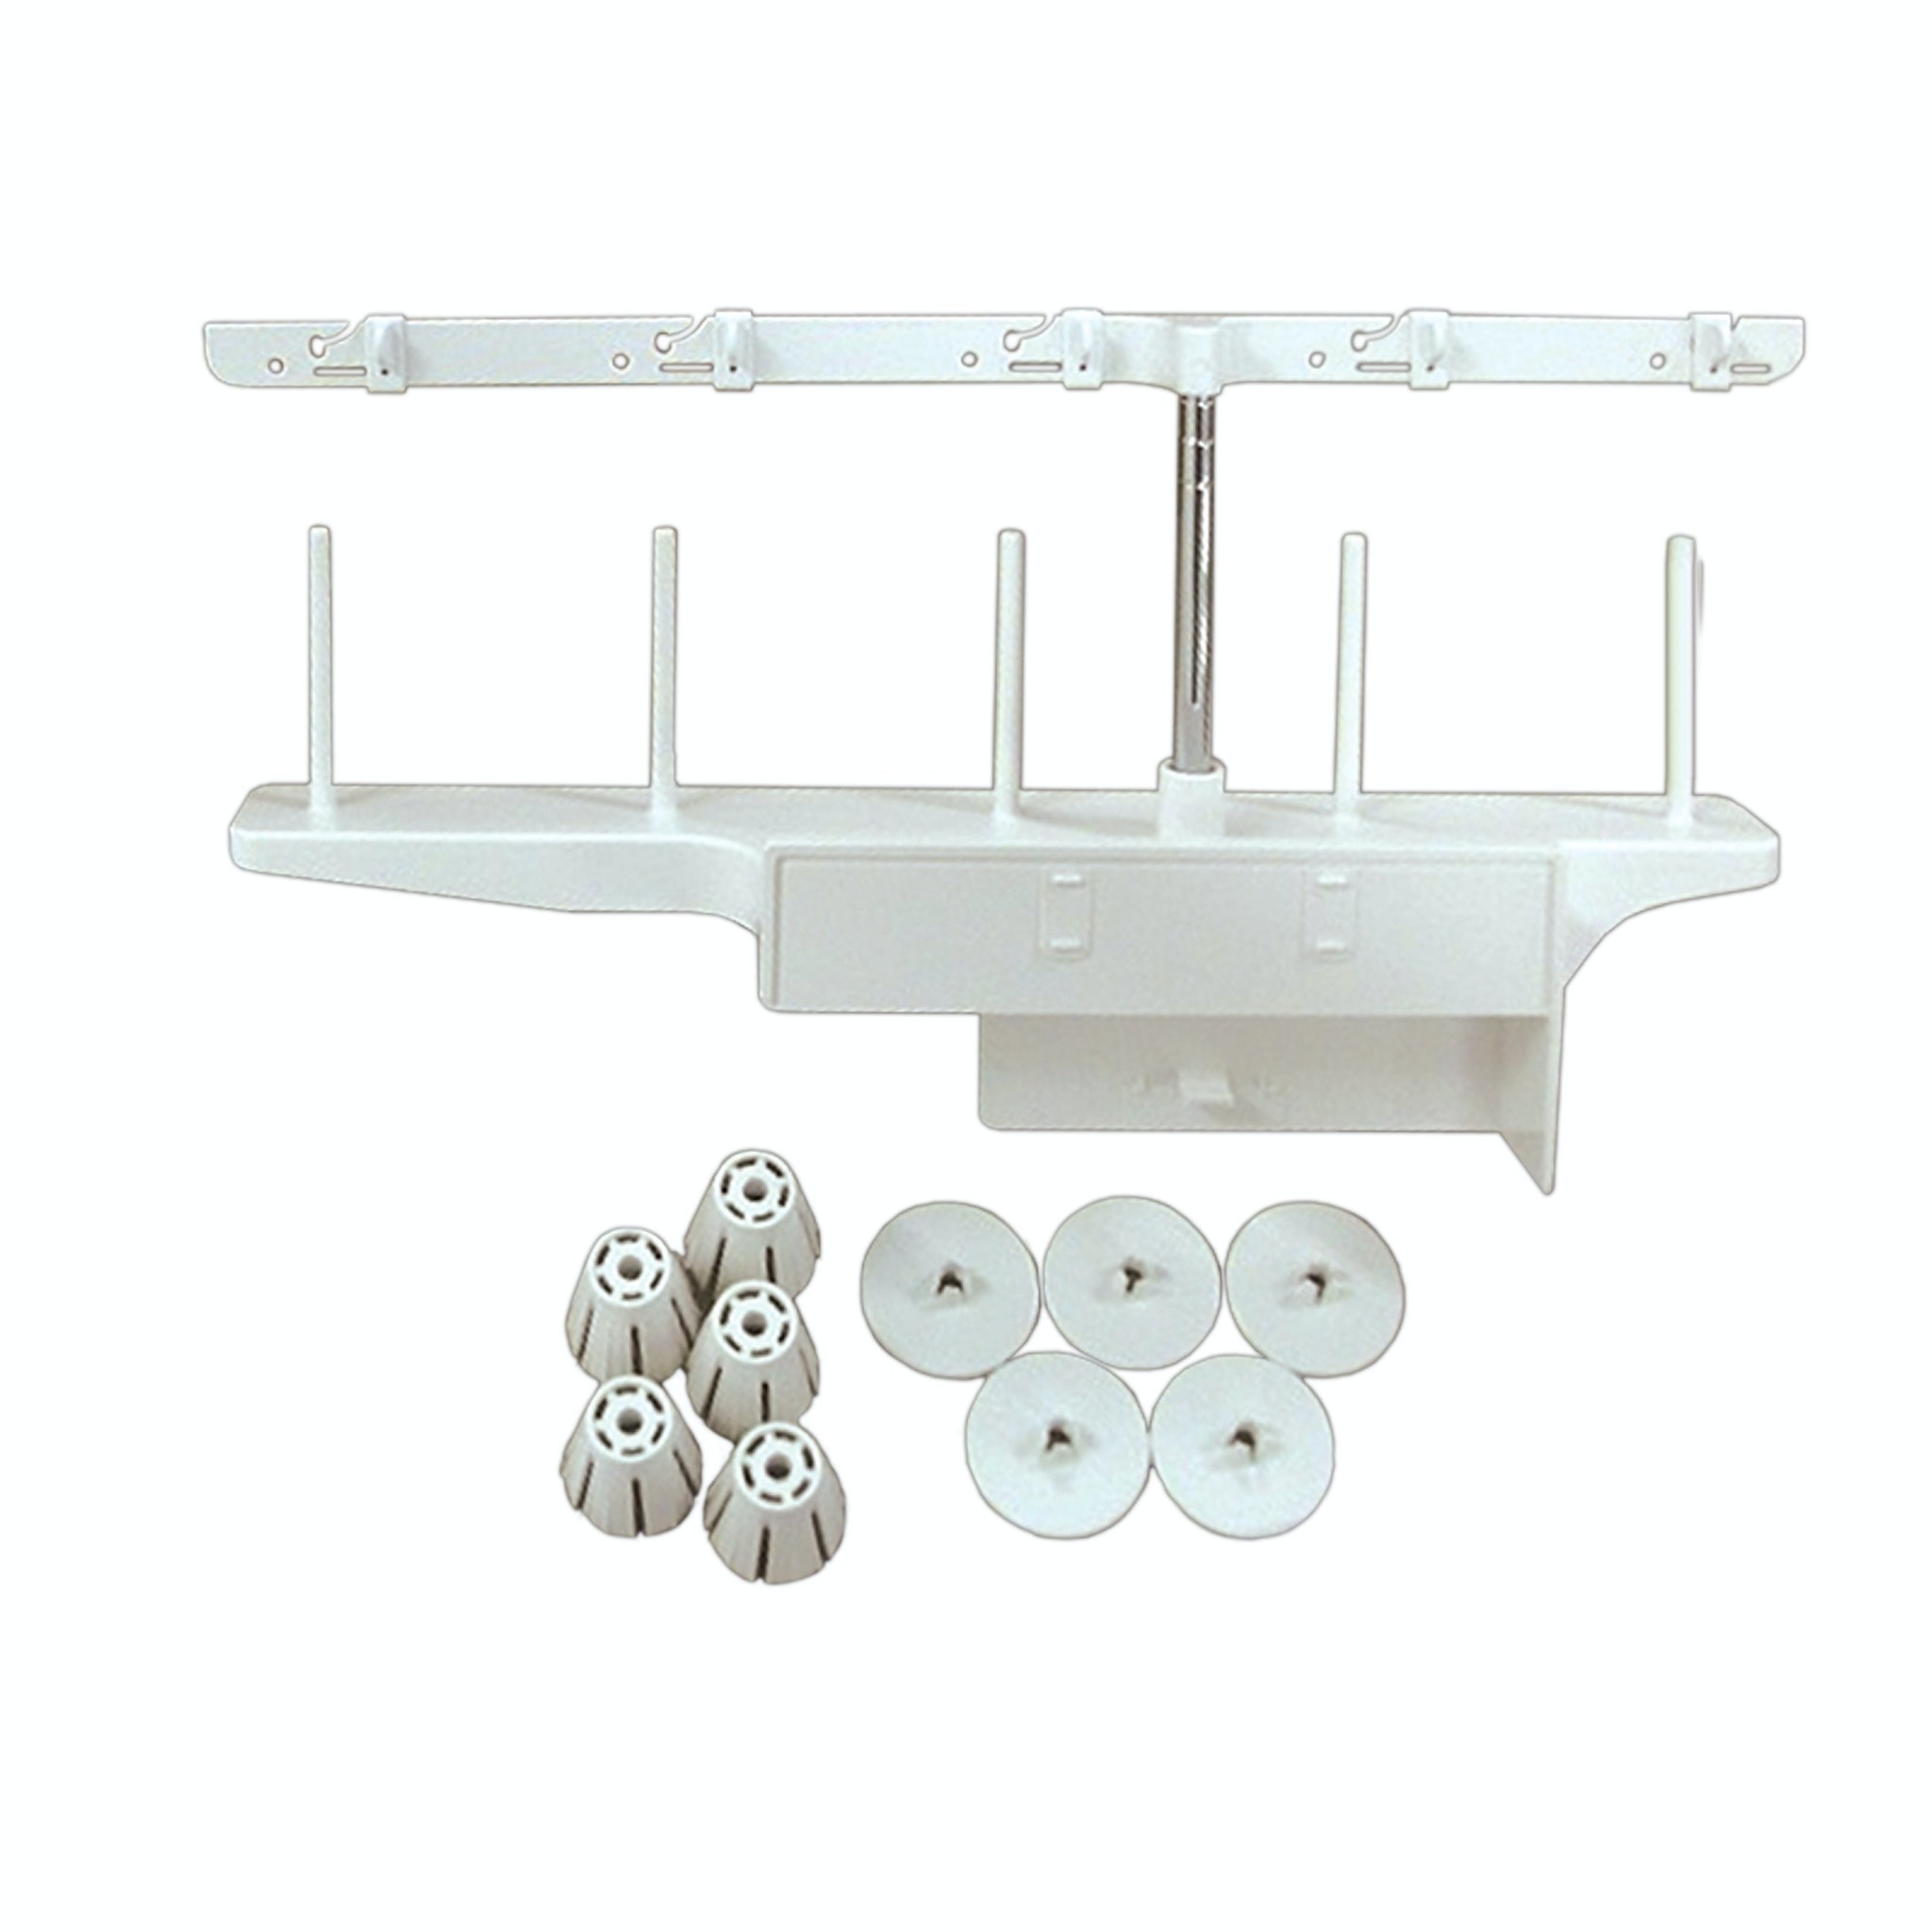 Janome Janome spool stand unit for CM17